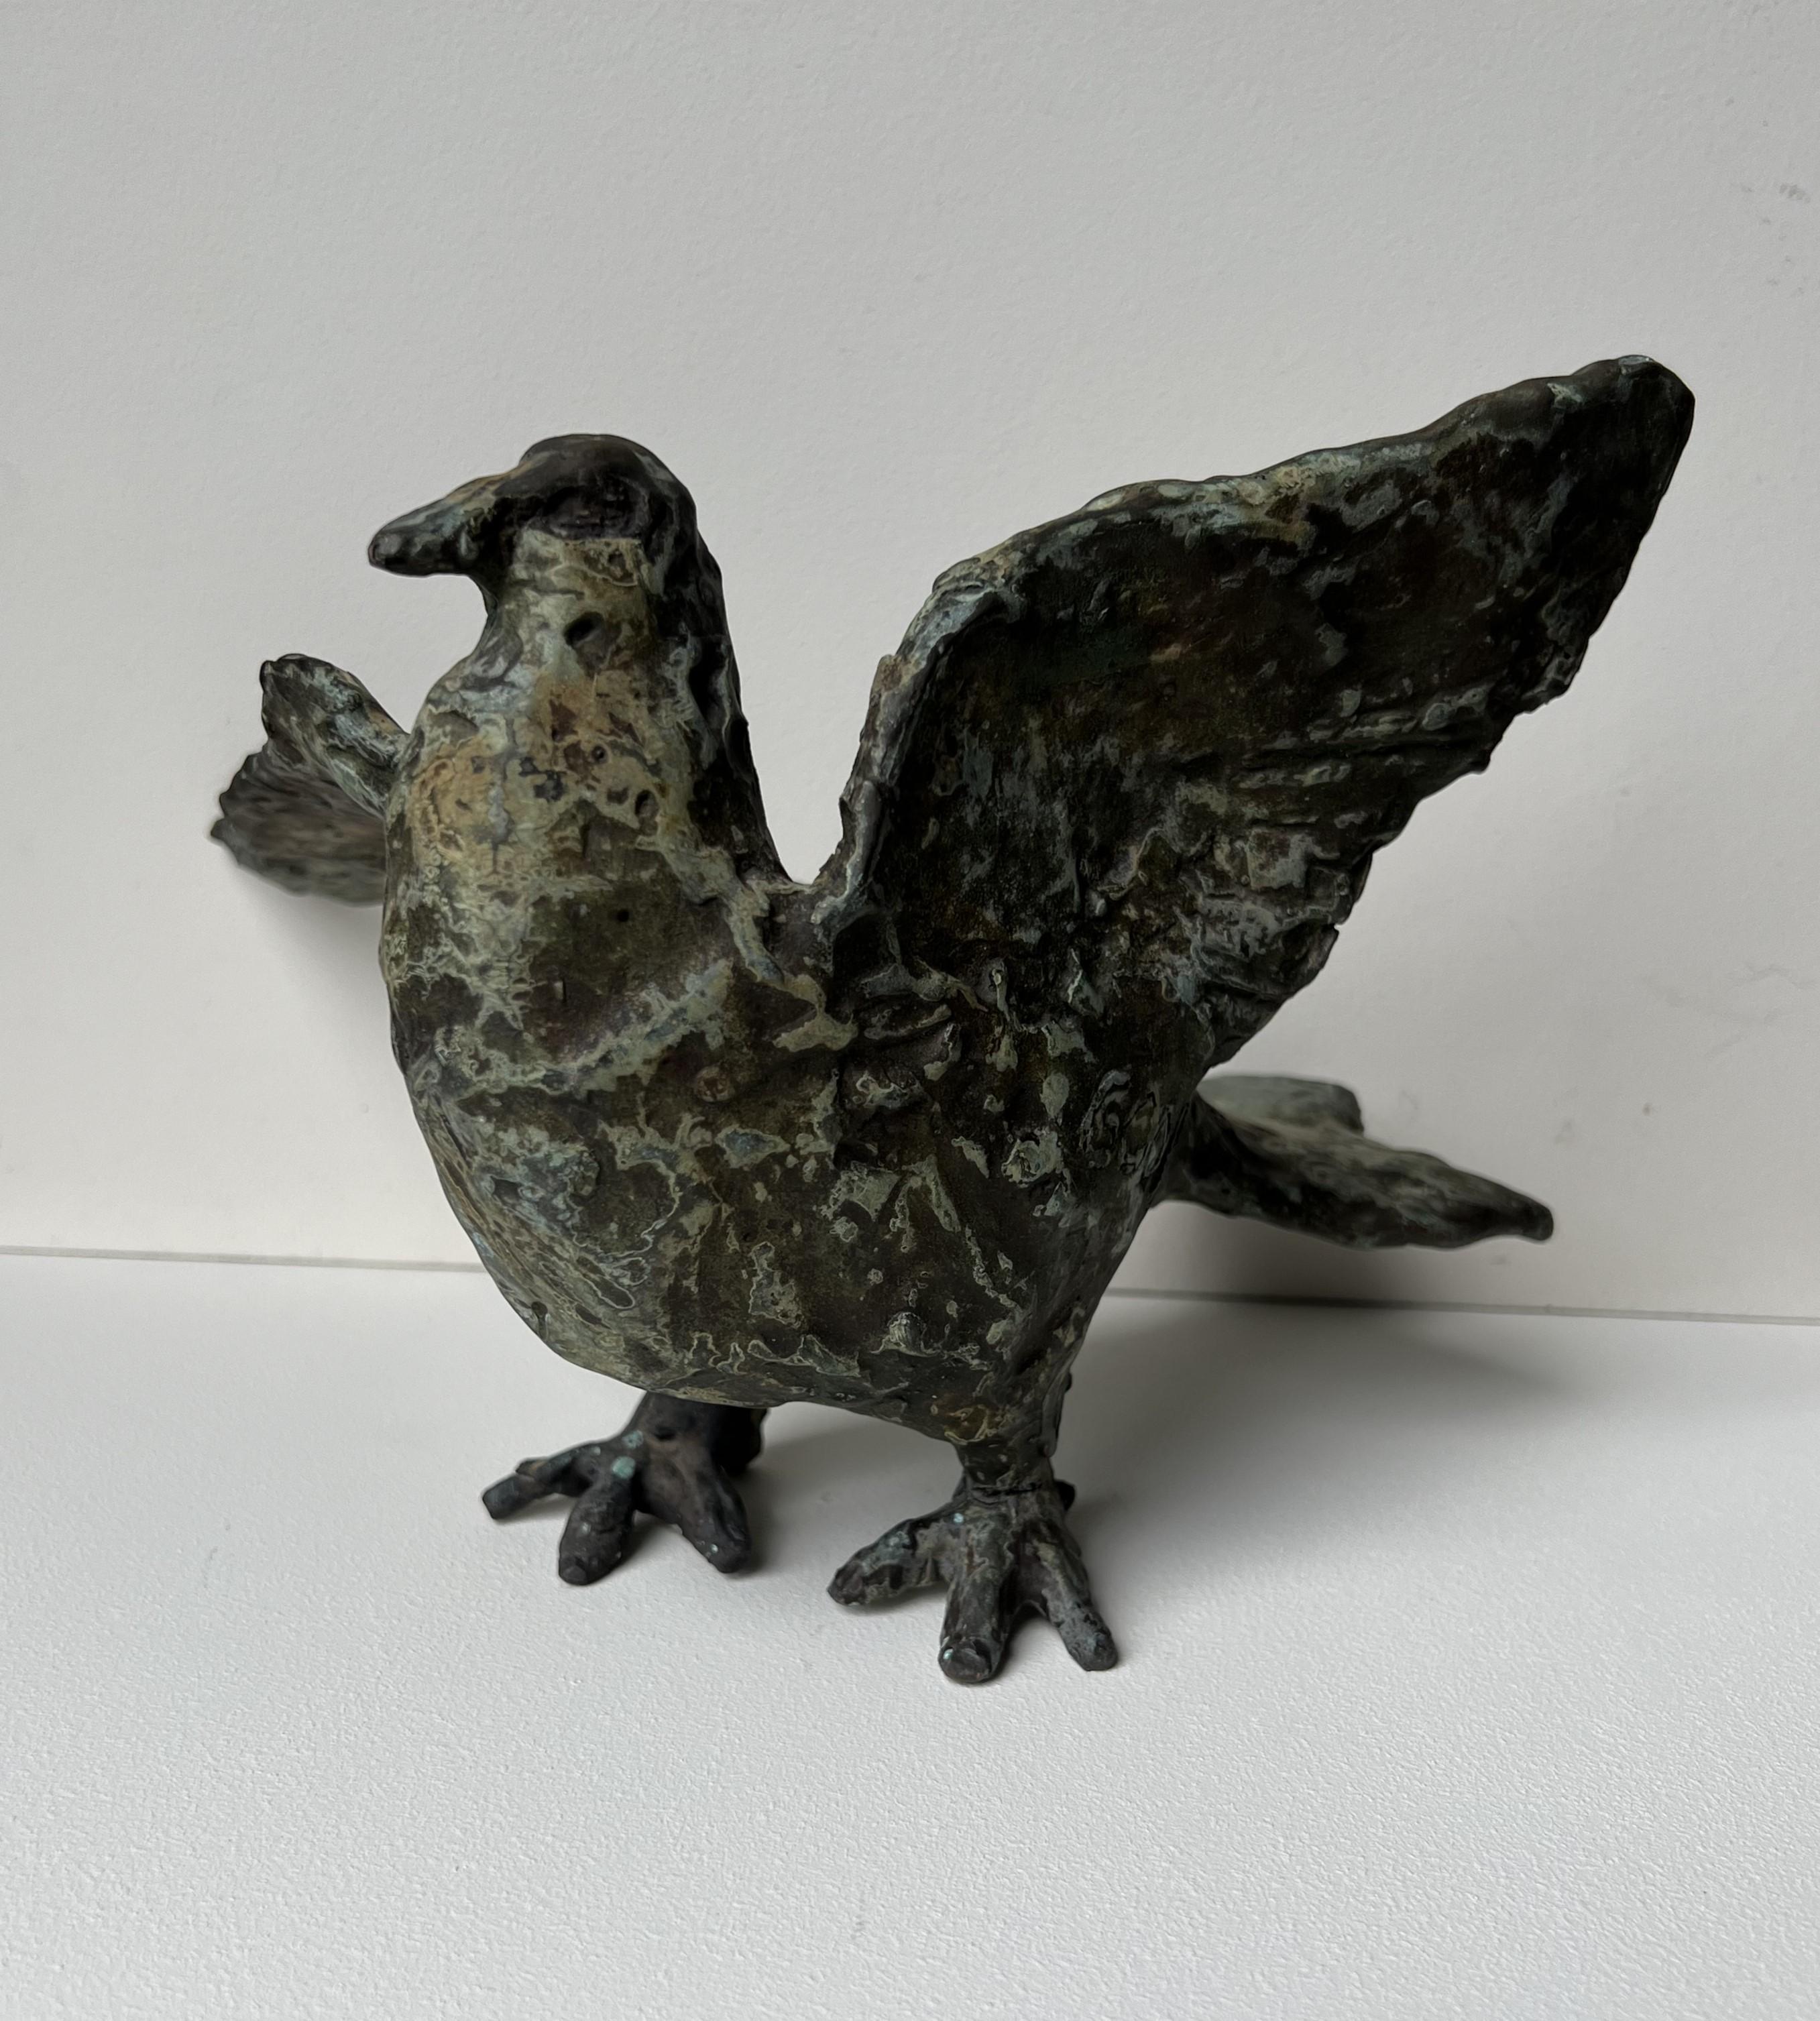 Beautiful and rare bronze sculptural piece by celebrated Israeli artist and sculptor, Ilana Goor. Giacometti-style sculpture made in solid bronze with beautiful patination and verdigris showing its unique character and age. Sculpture depicts a dove